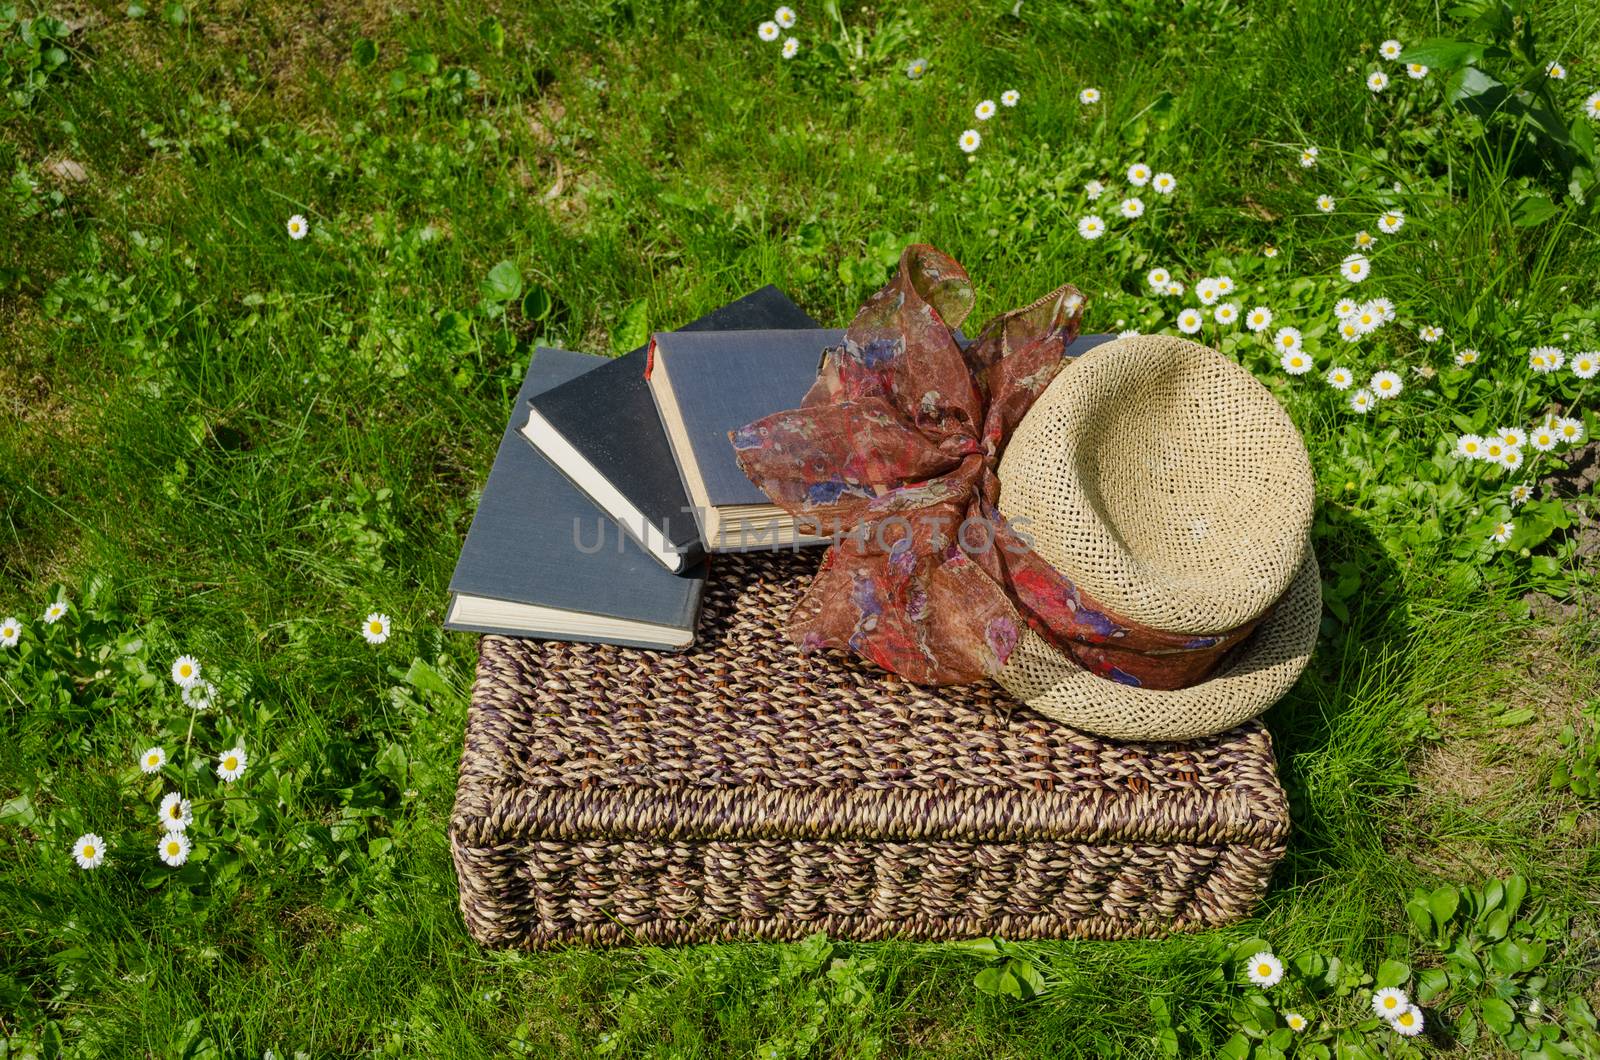 Wicker basket full of books between lawn grass and daisy flowers and retro hat.